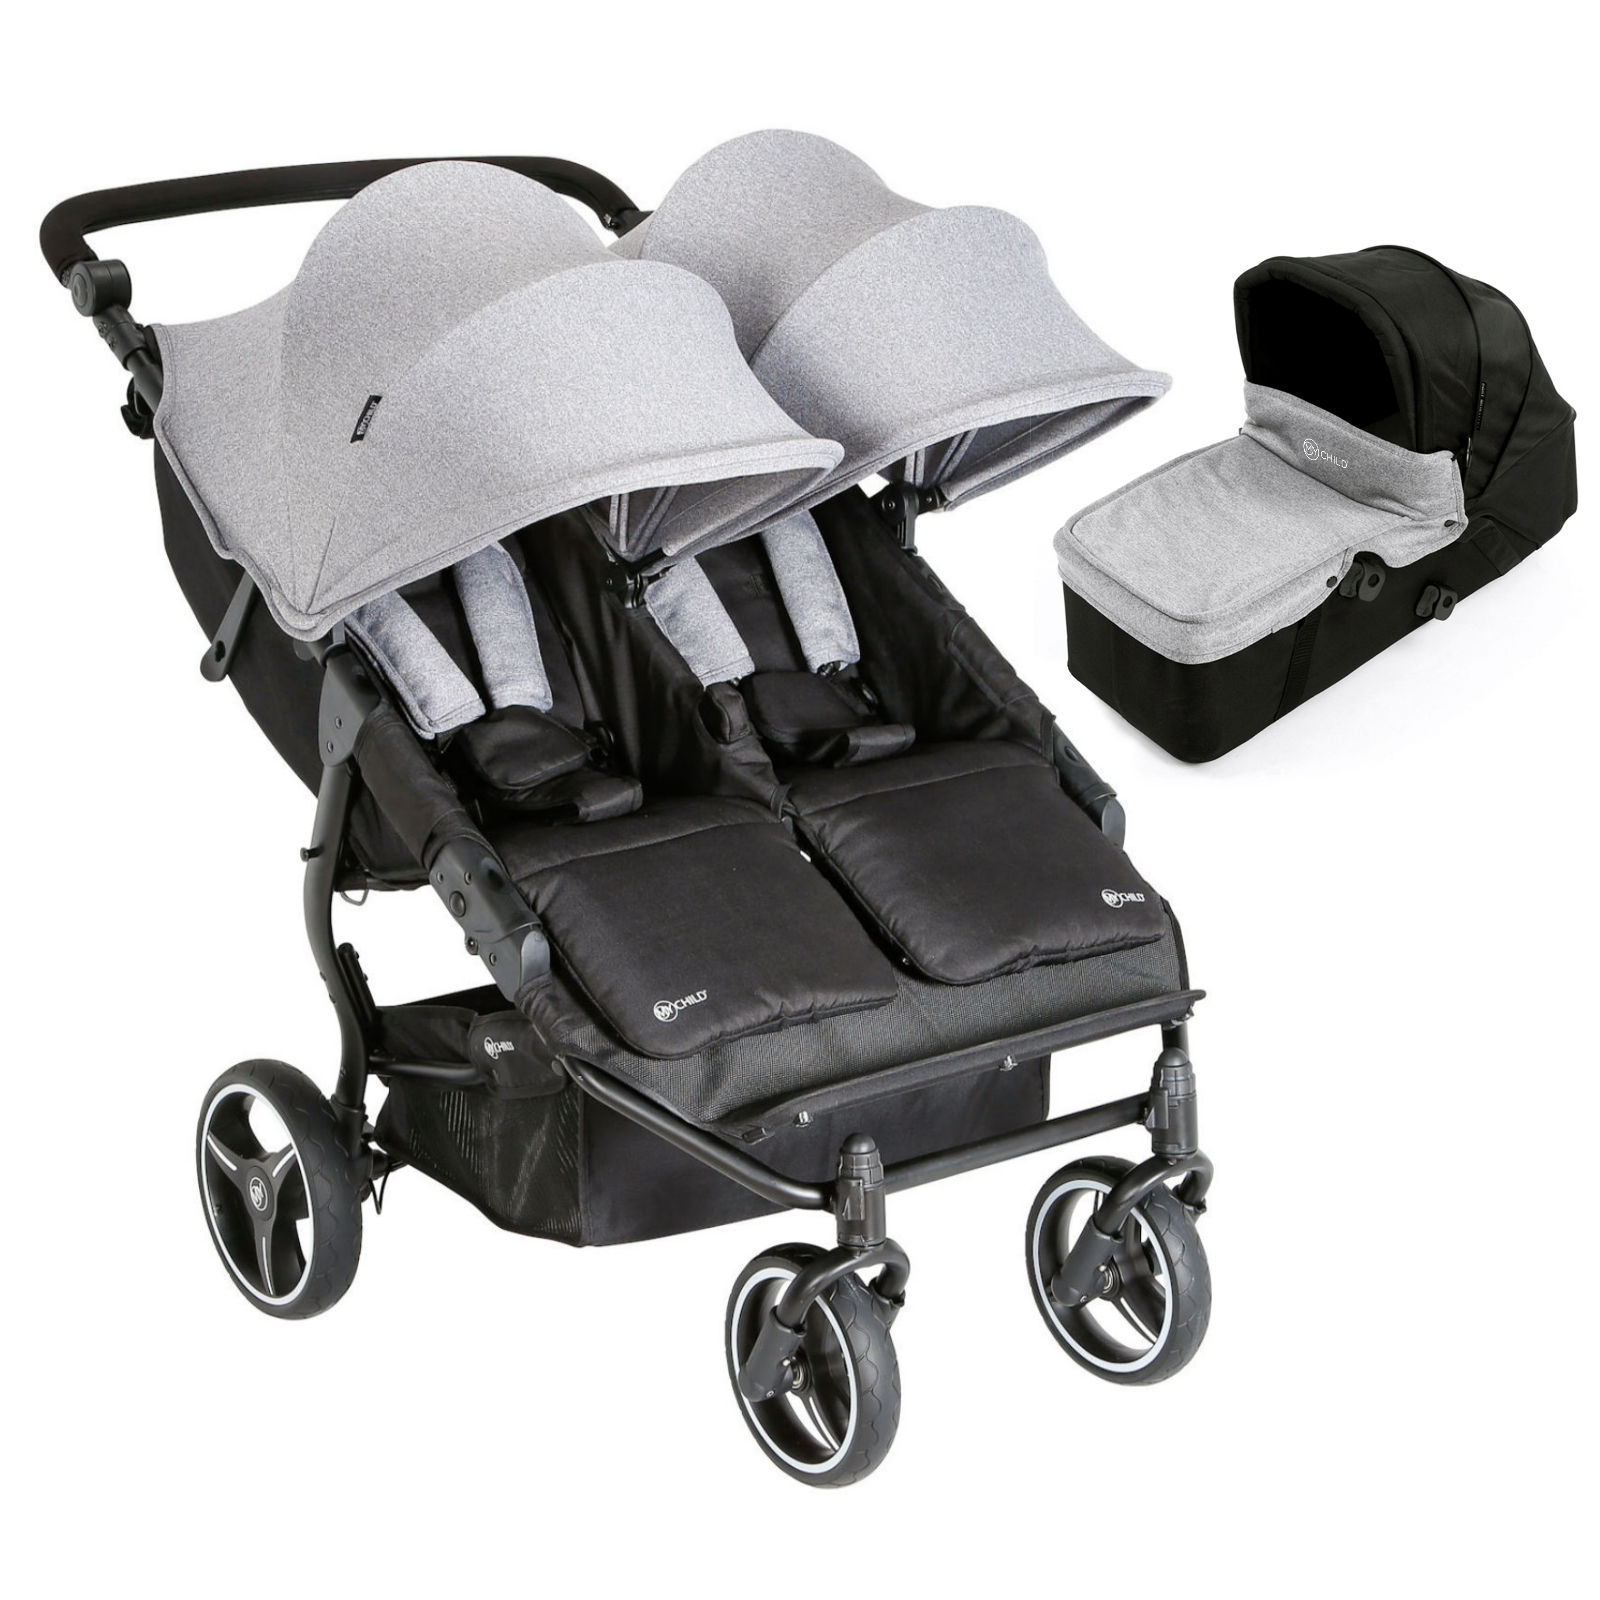 double pushchair suitable for newborn and toddler